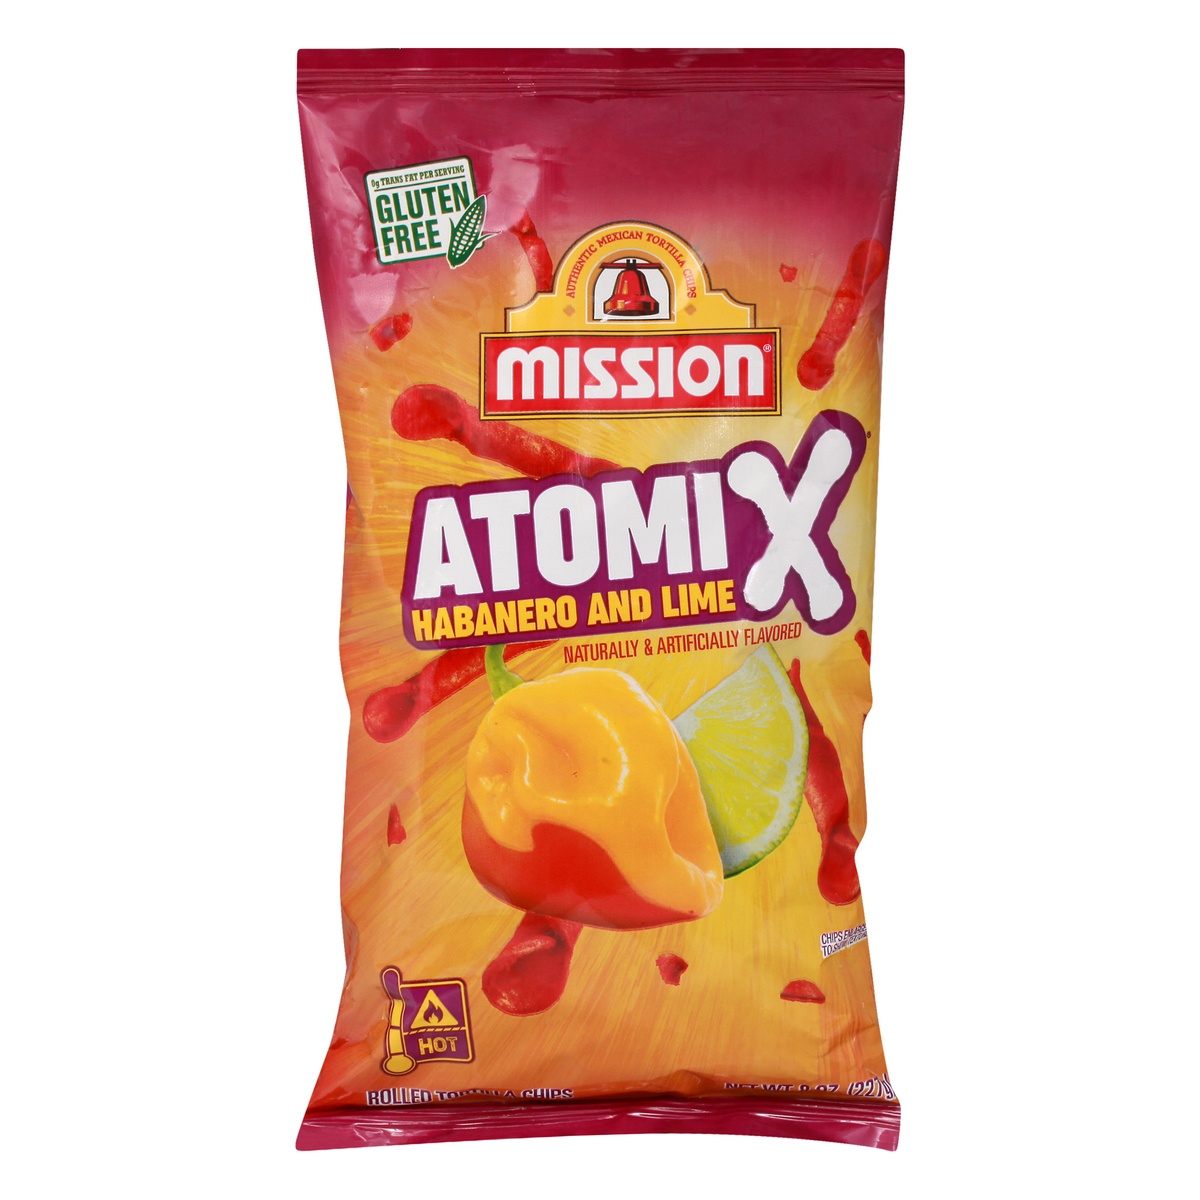 slide 11 of 11, Mission Atomix Habanero And Lime Rolled Tortilla Chips, 8 oz